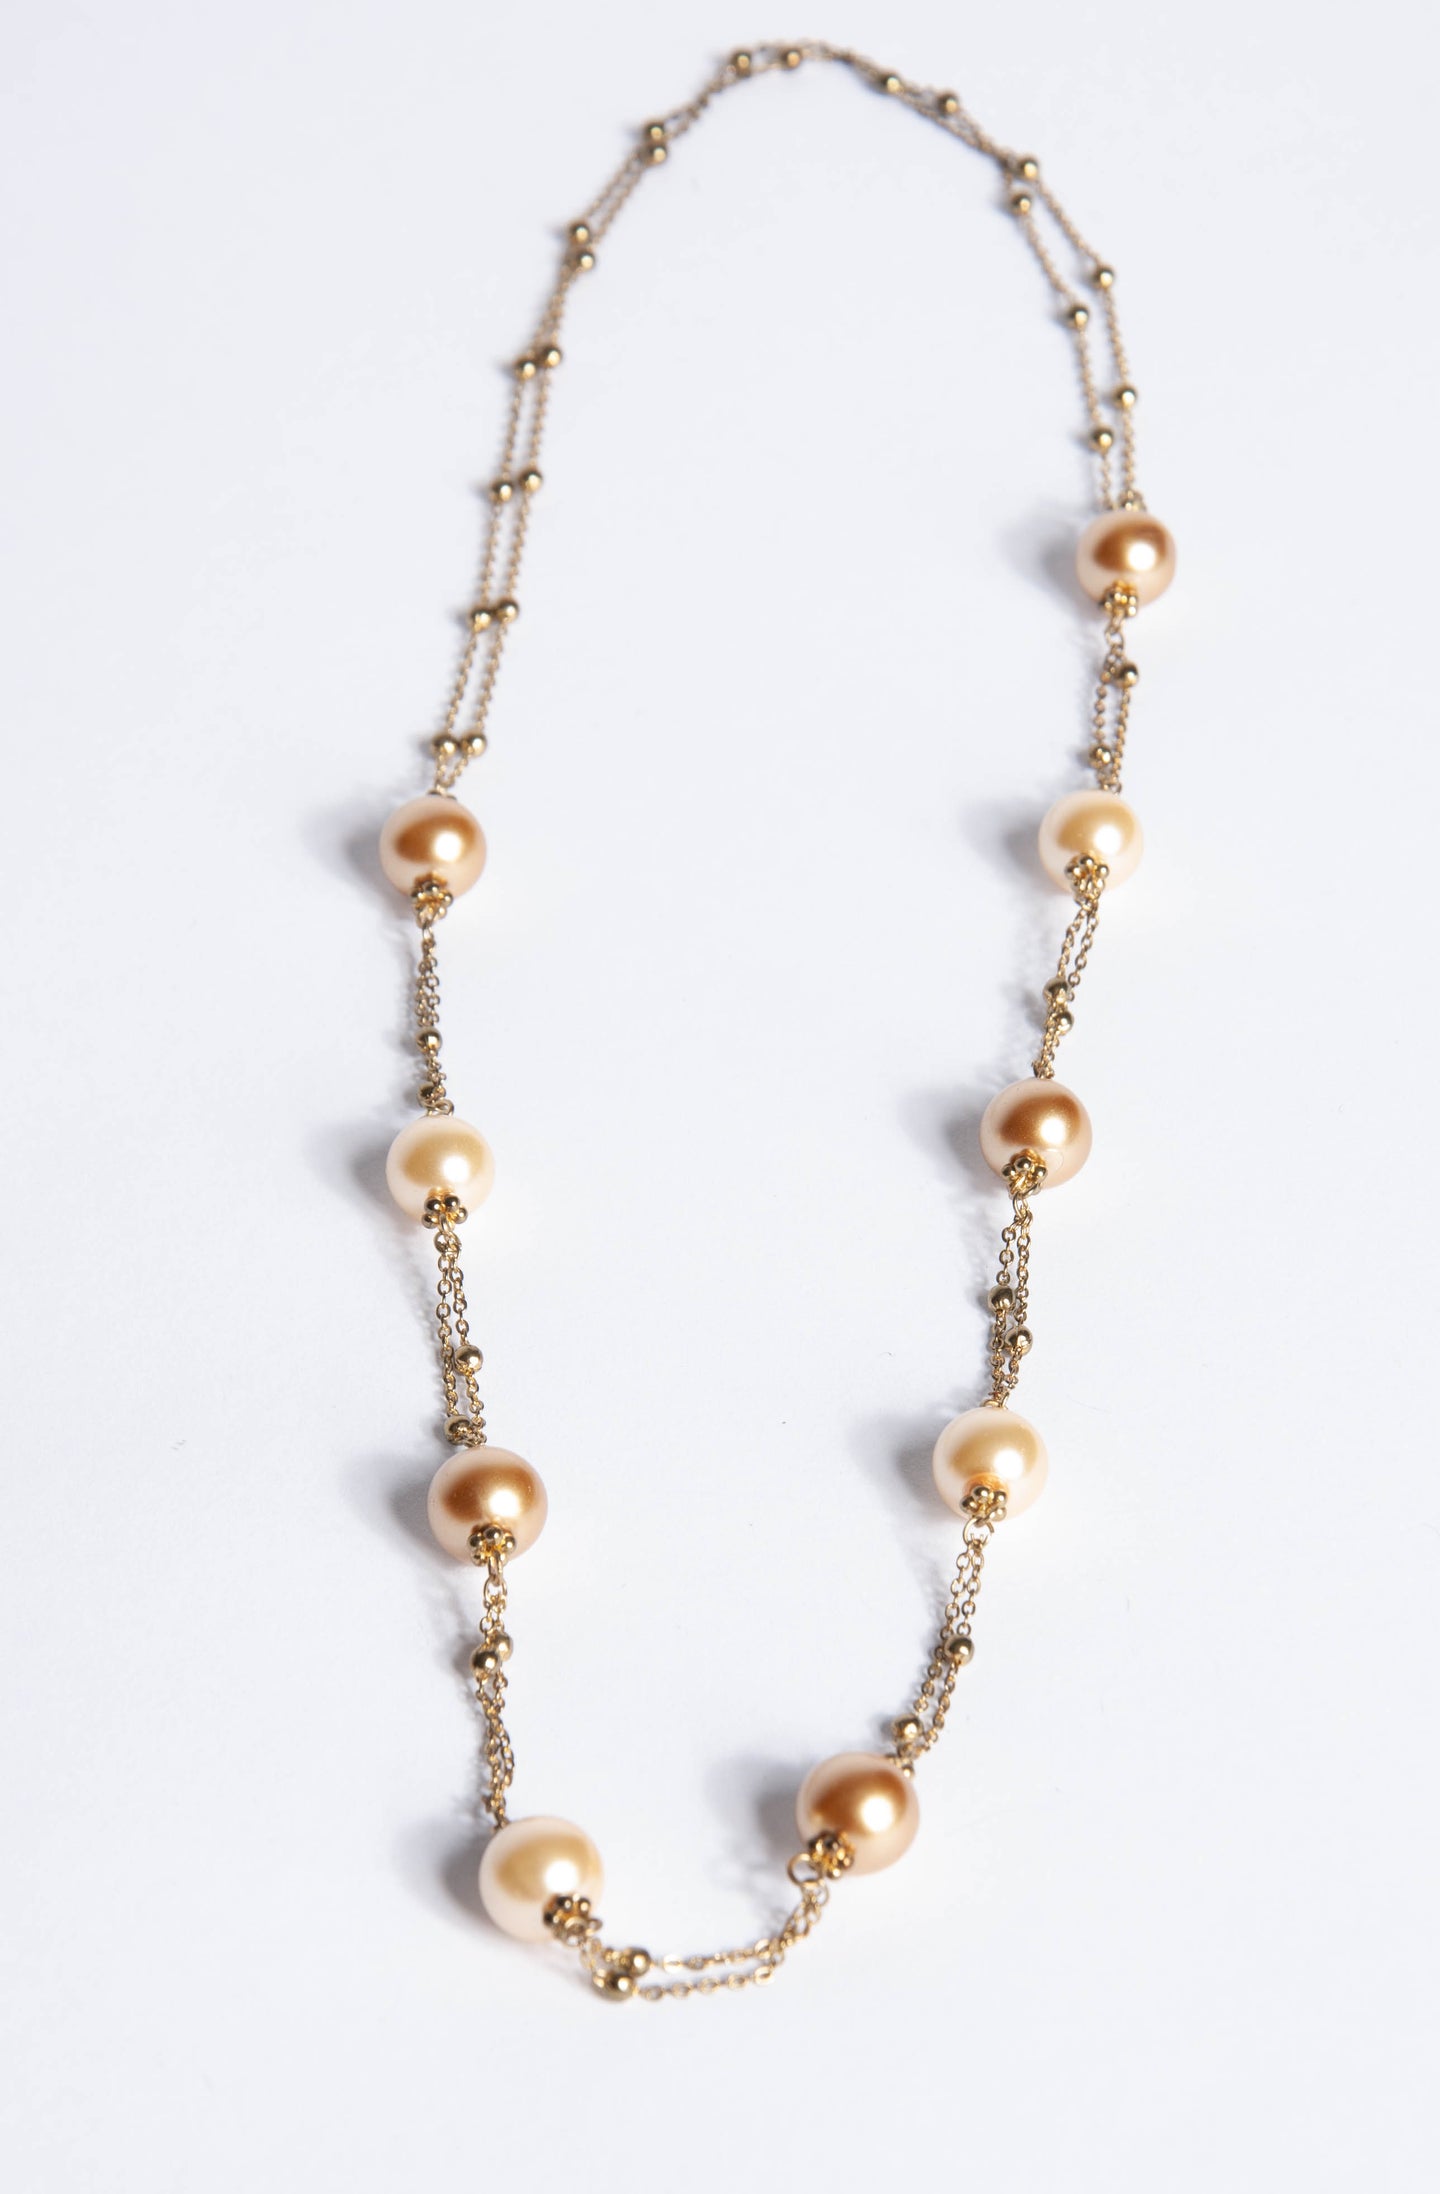 VINTAGE GOLDTONE METAL BRONZE AND CREAM PEARL COSTUME NECKLACE